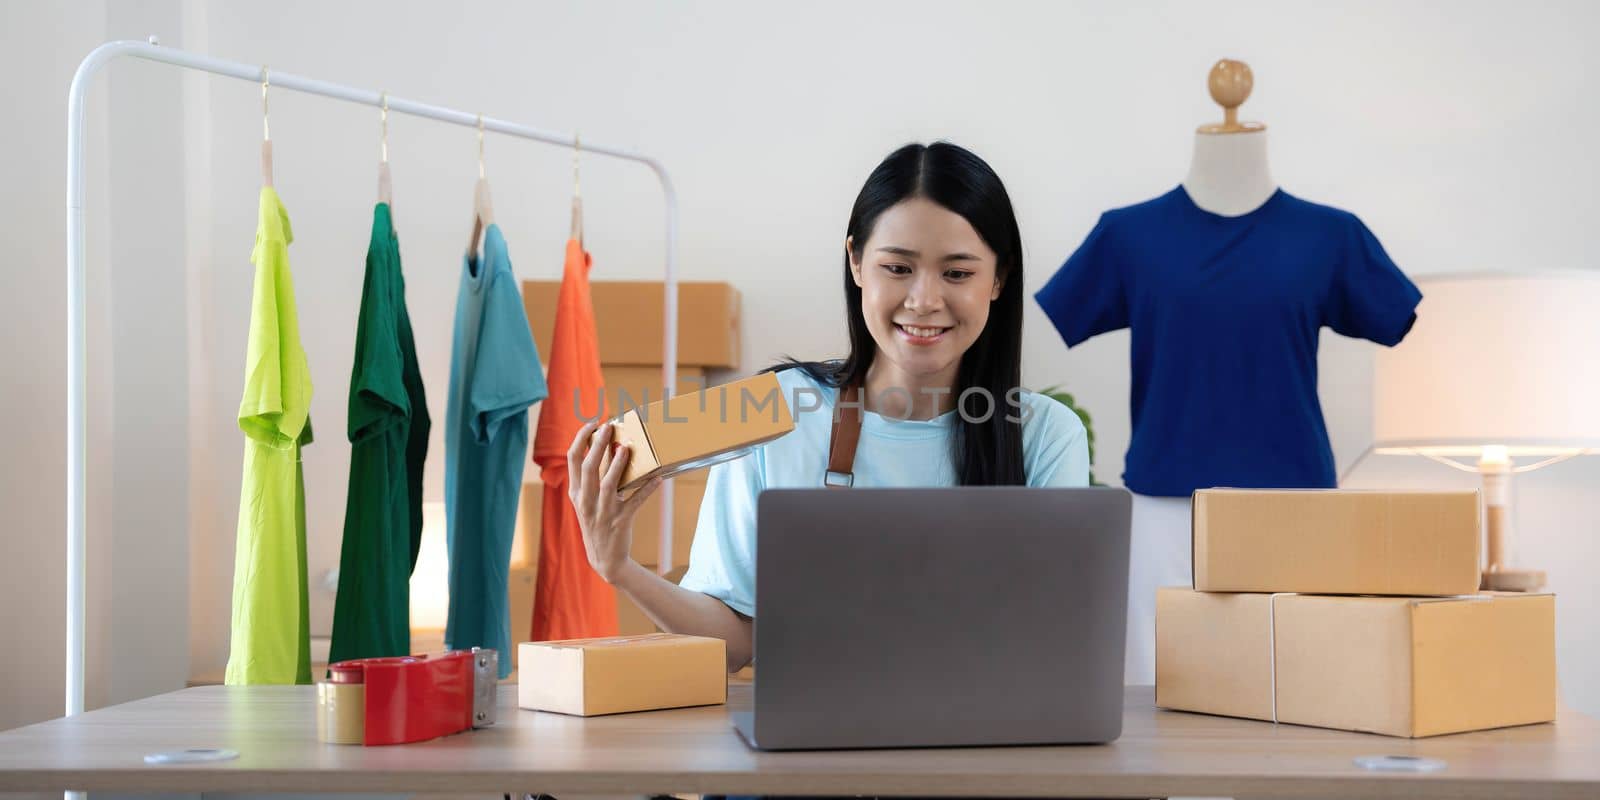 Young woman small business owner working at home office. Online marketing packaging delivery, startup SME entrepreneur or freelance woman concept.